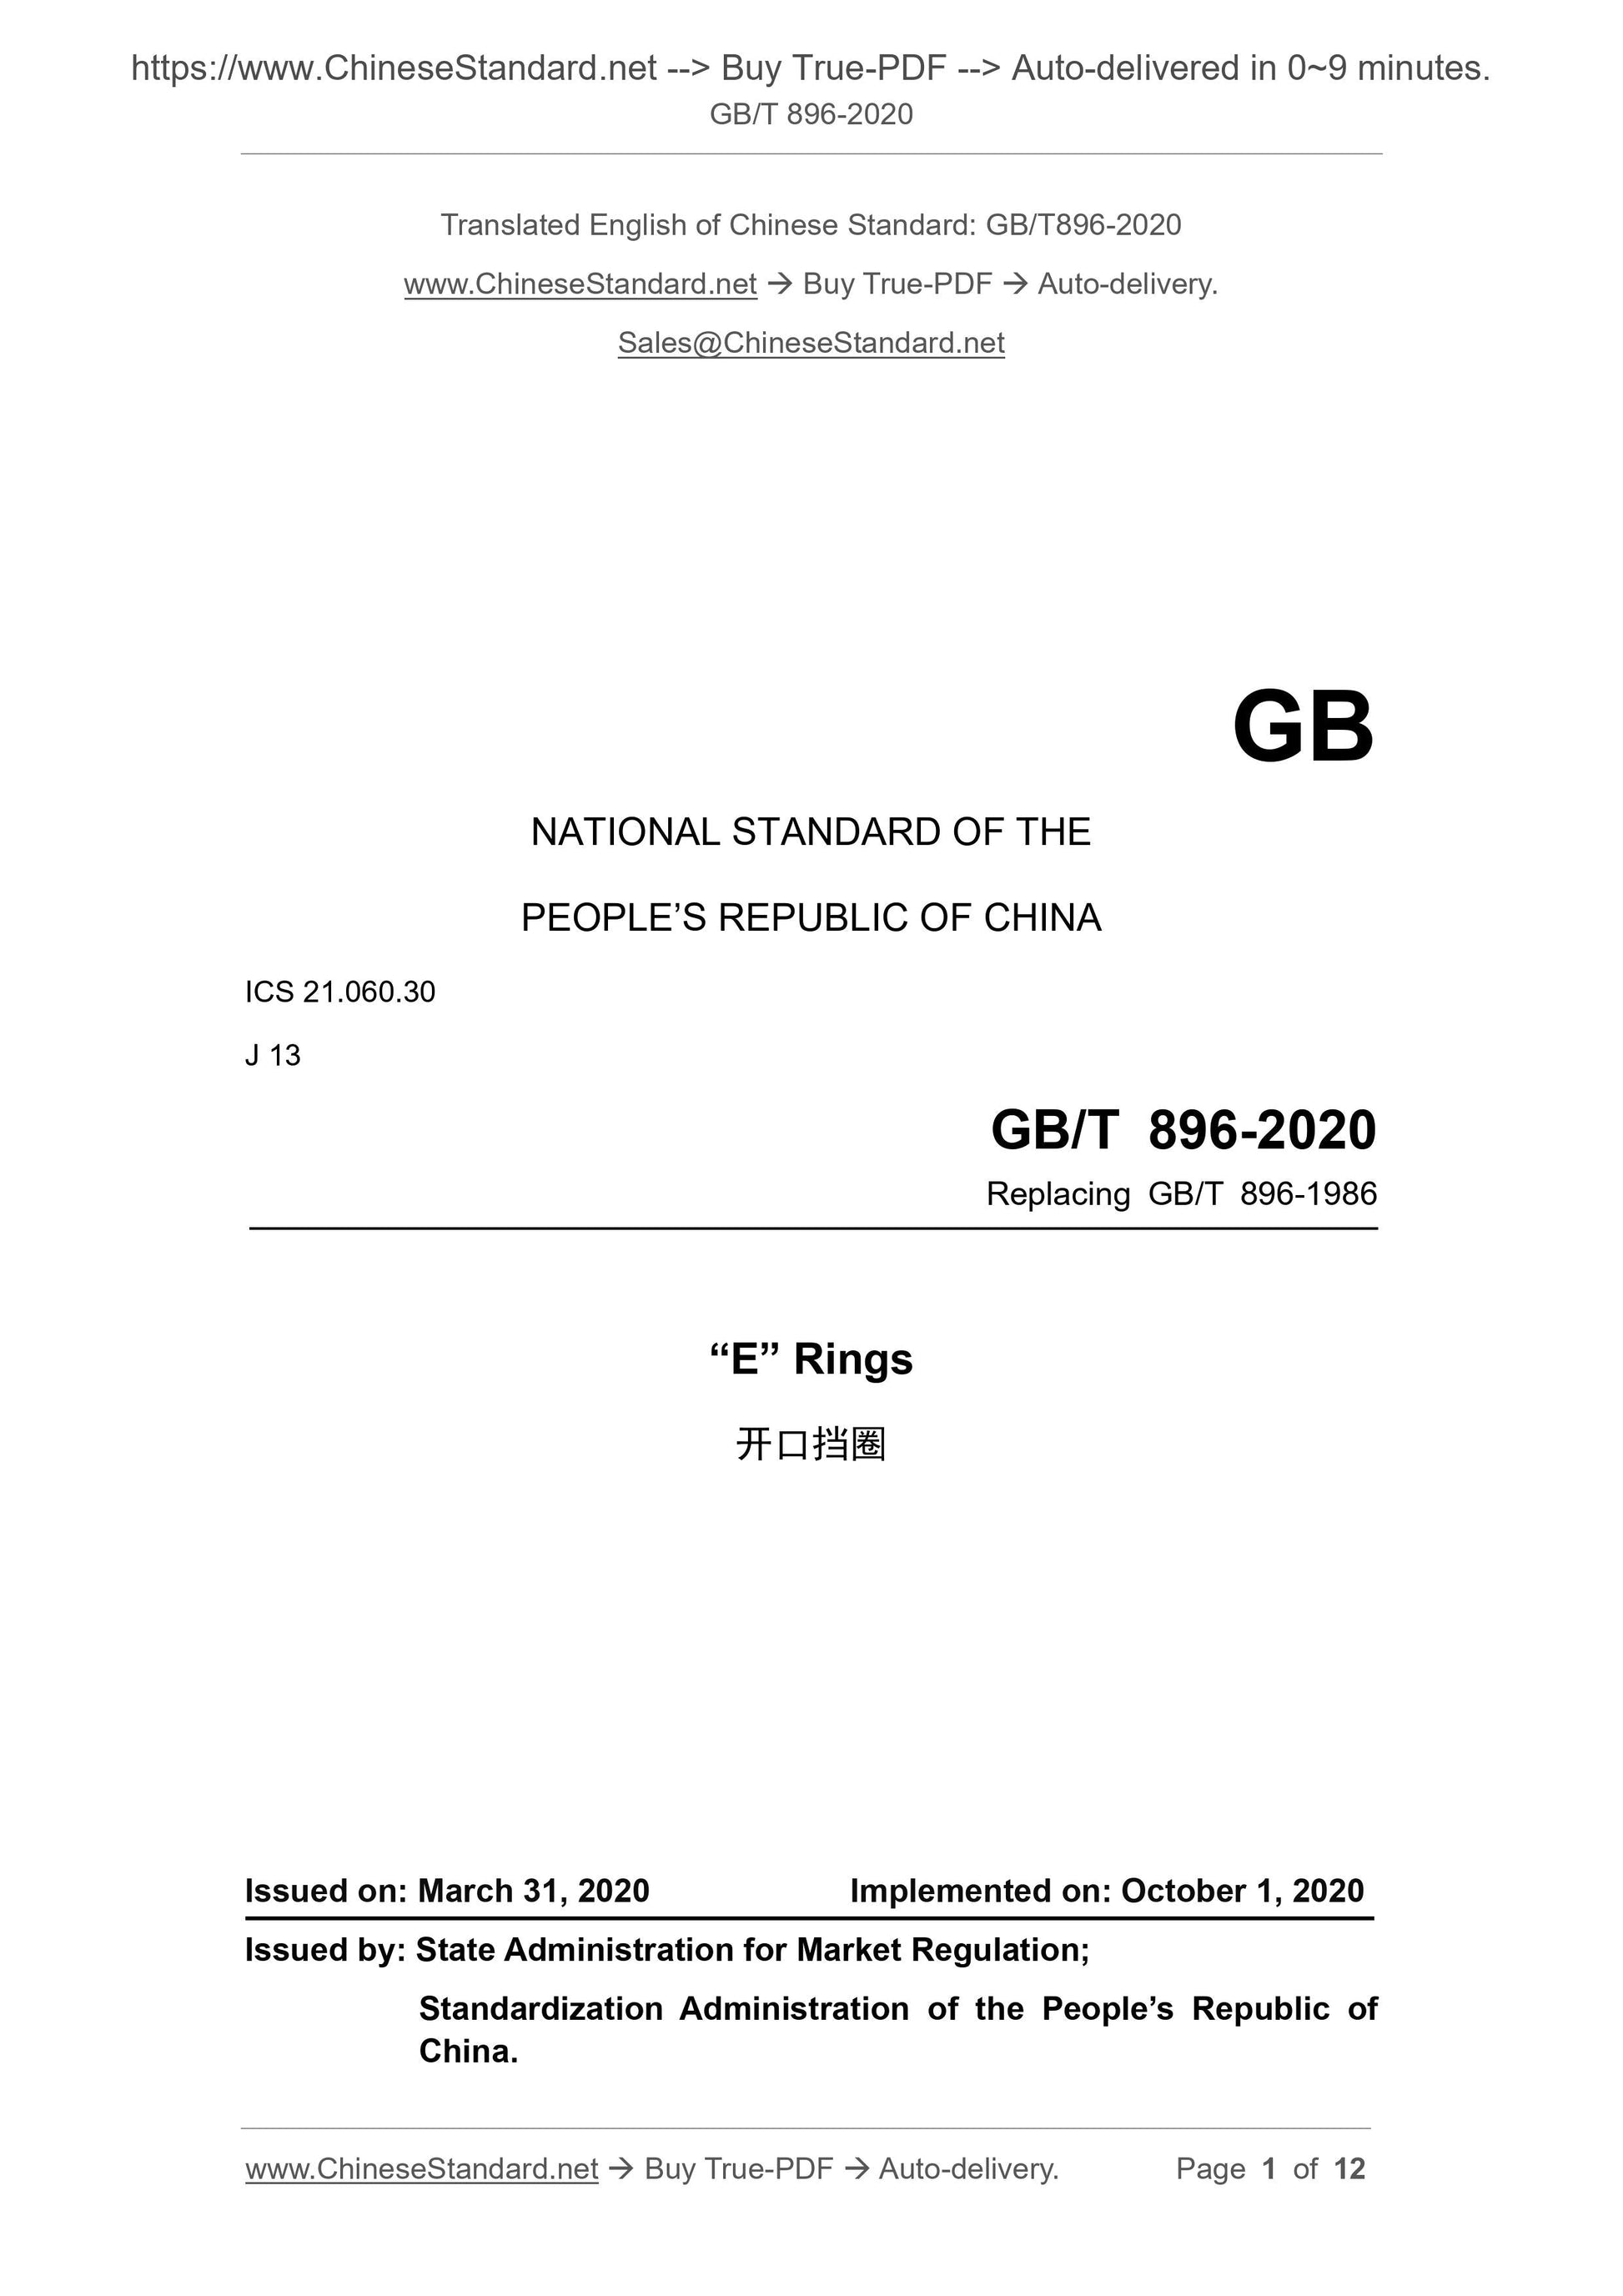 GB/T 896-2020 Page 1